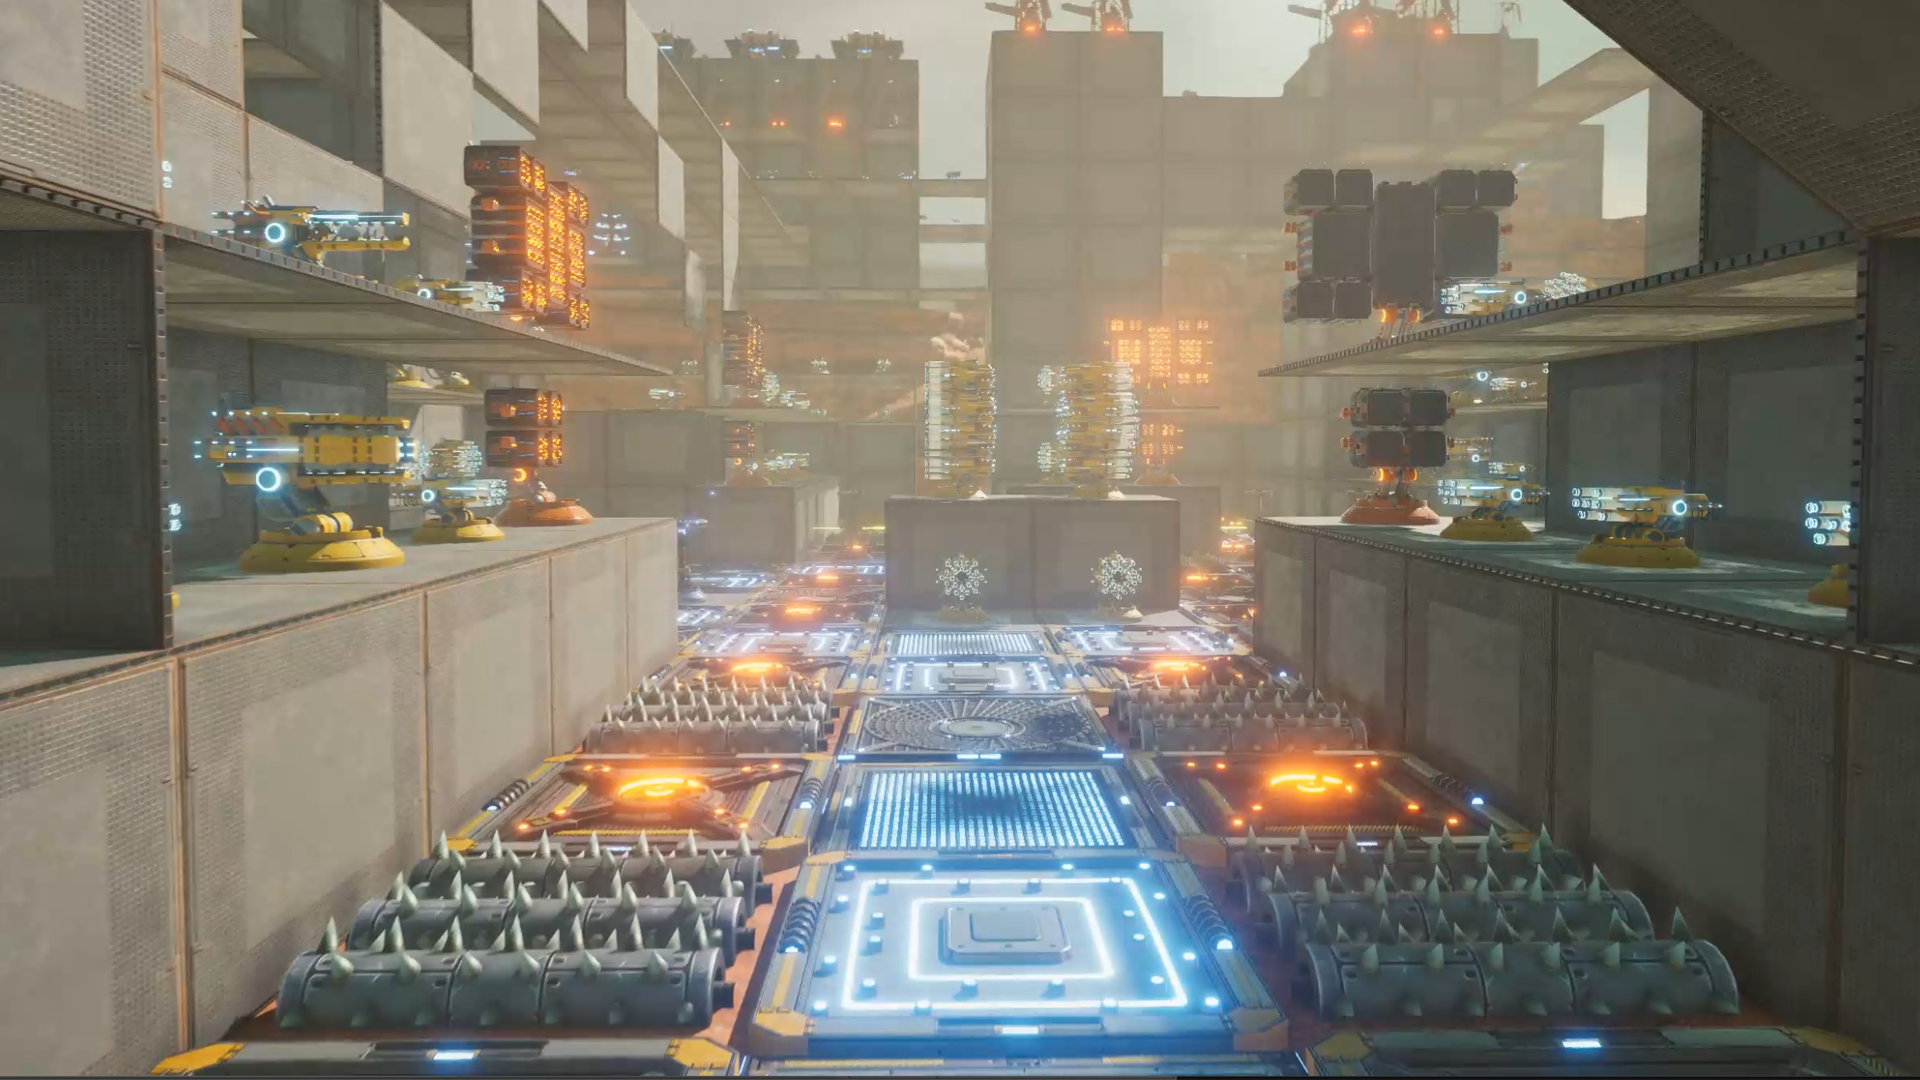 Build bases at a massive scale with physics-based traps to defend against waves of enemies.